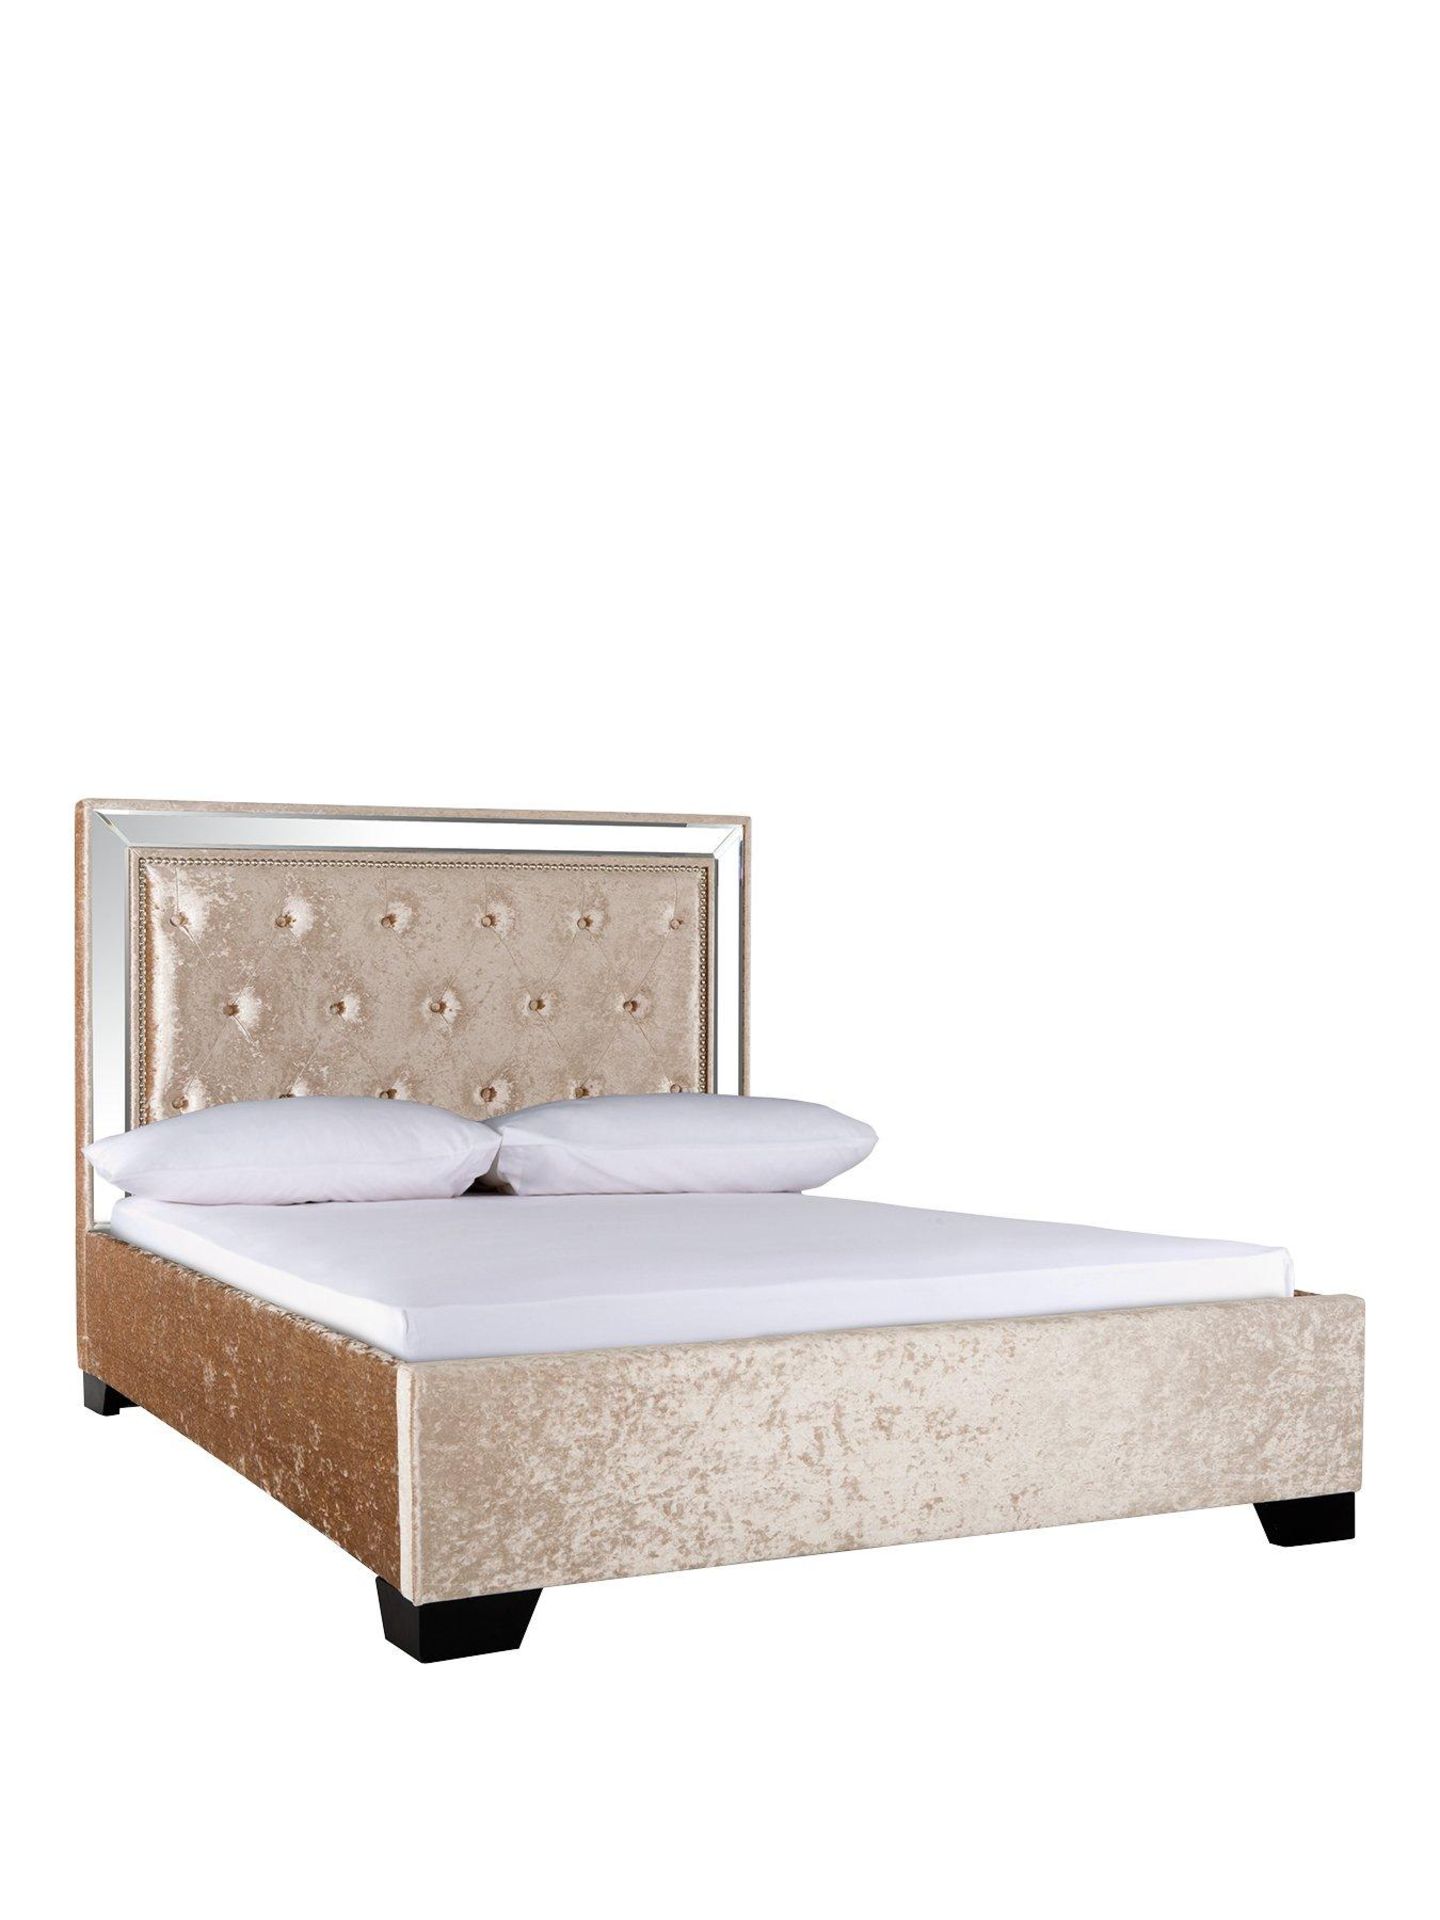 Boxed Item Broadway Double Bed [Gold] 110X159X217Cm rrp, £778.0